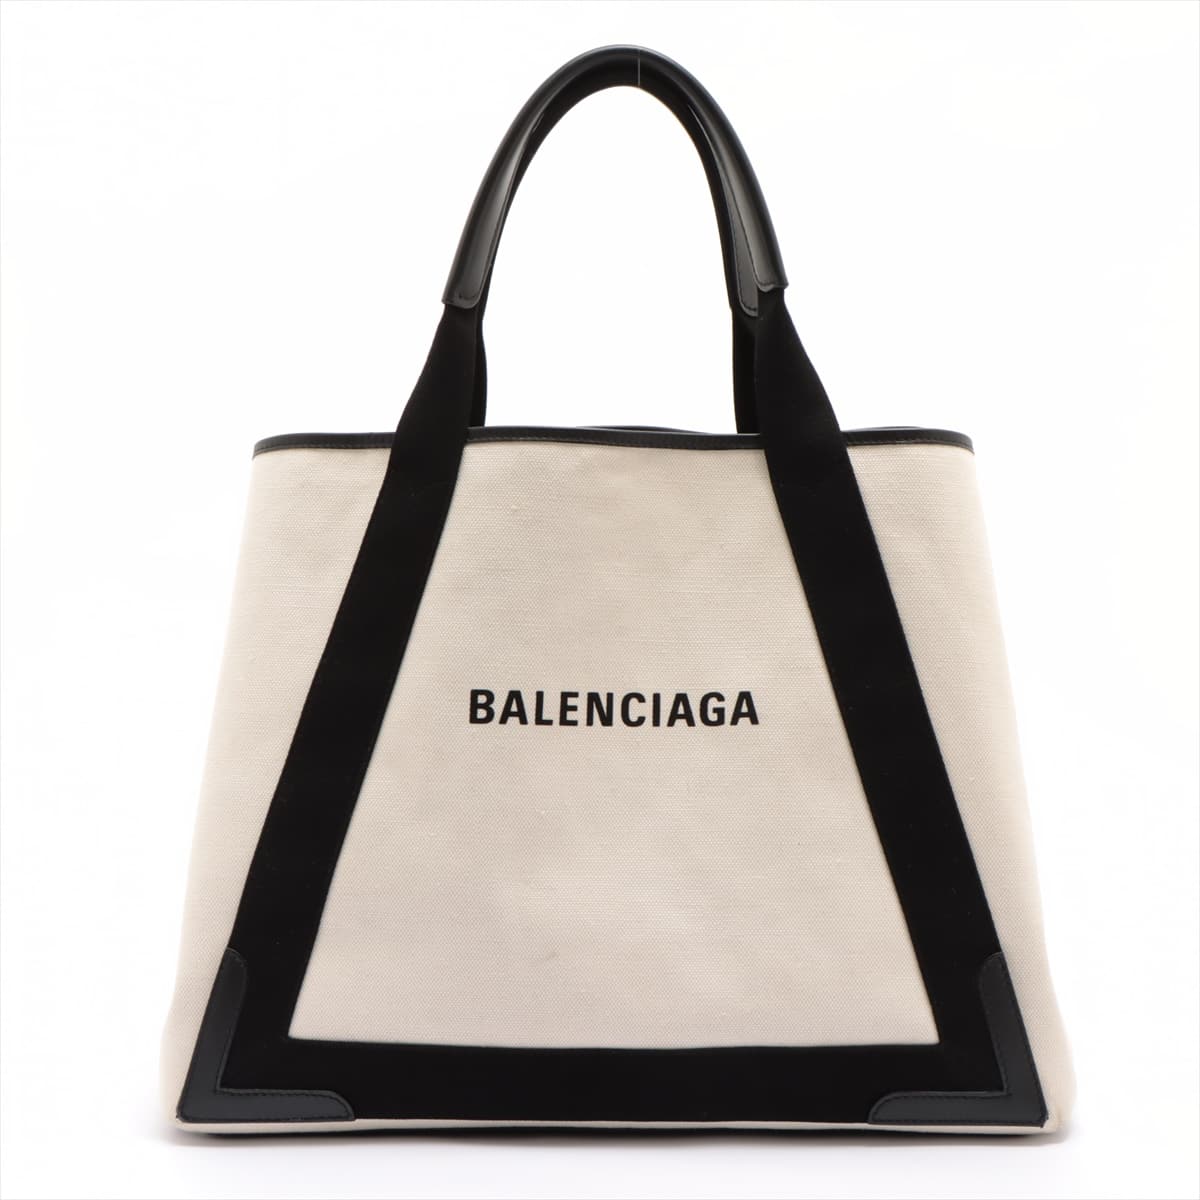 Balenciaga Navy Cabas M Canvas & leather Tote bag Black × White 339936 with pouch